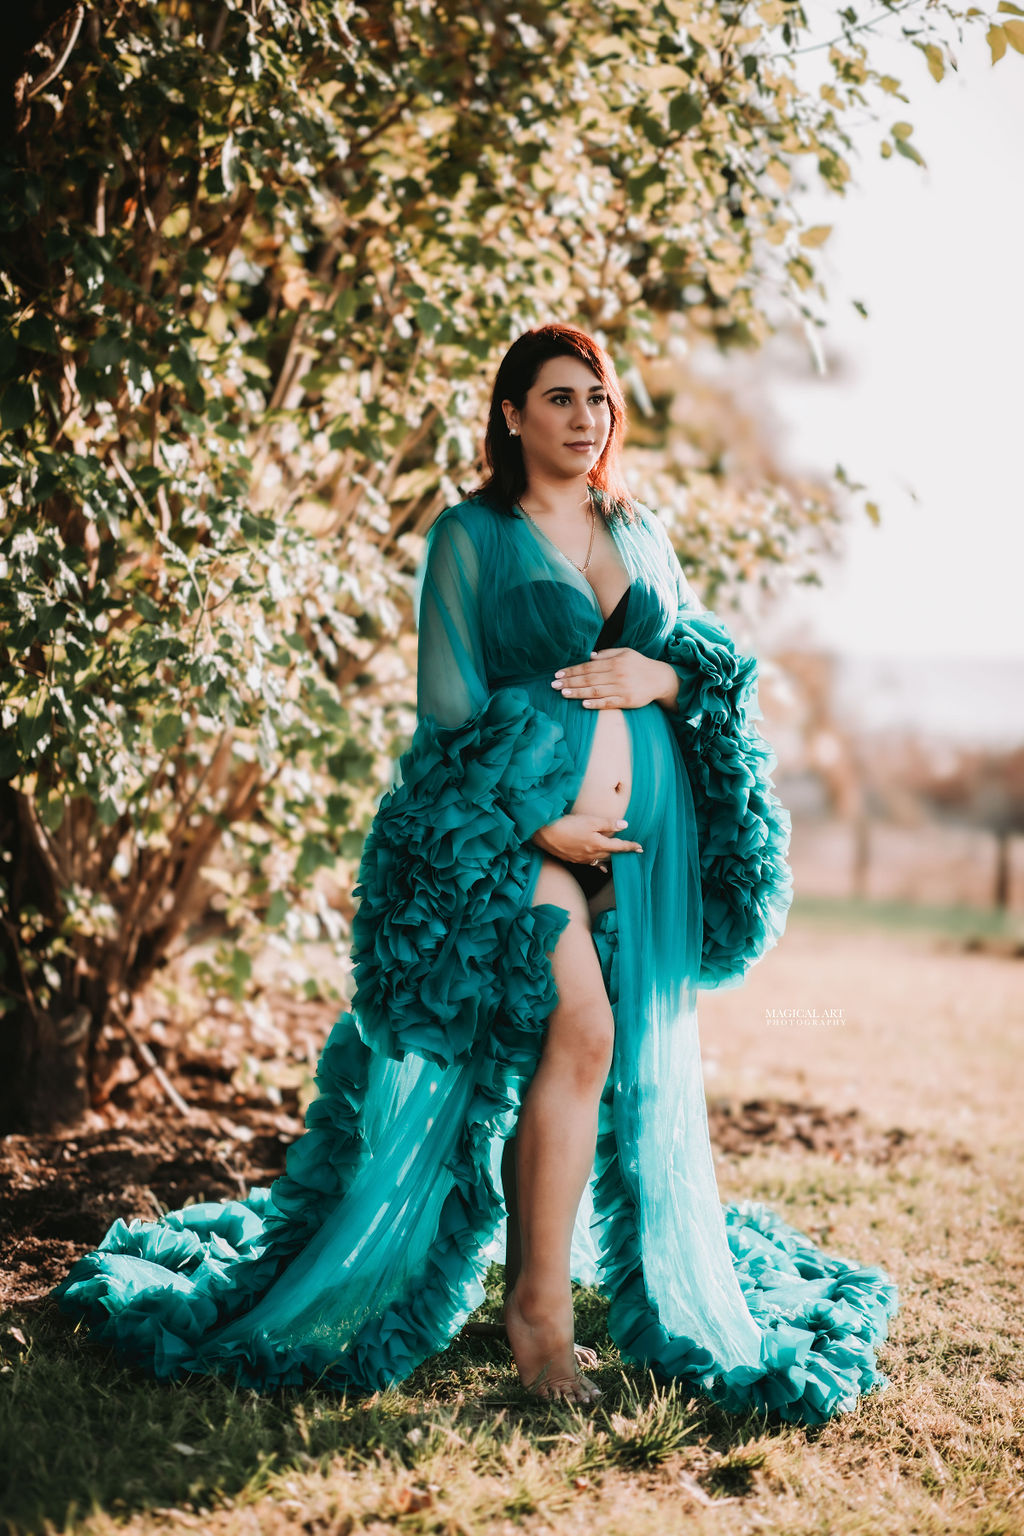 Pregnancy photoshoot dresses for rent in hyderabad